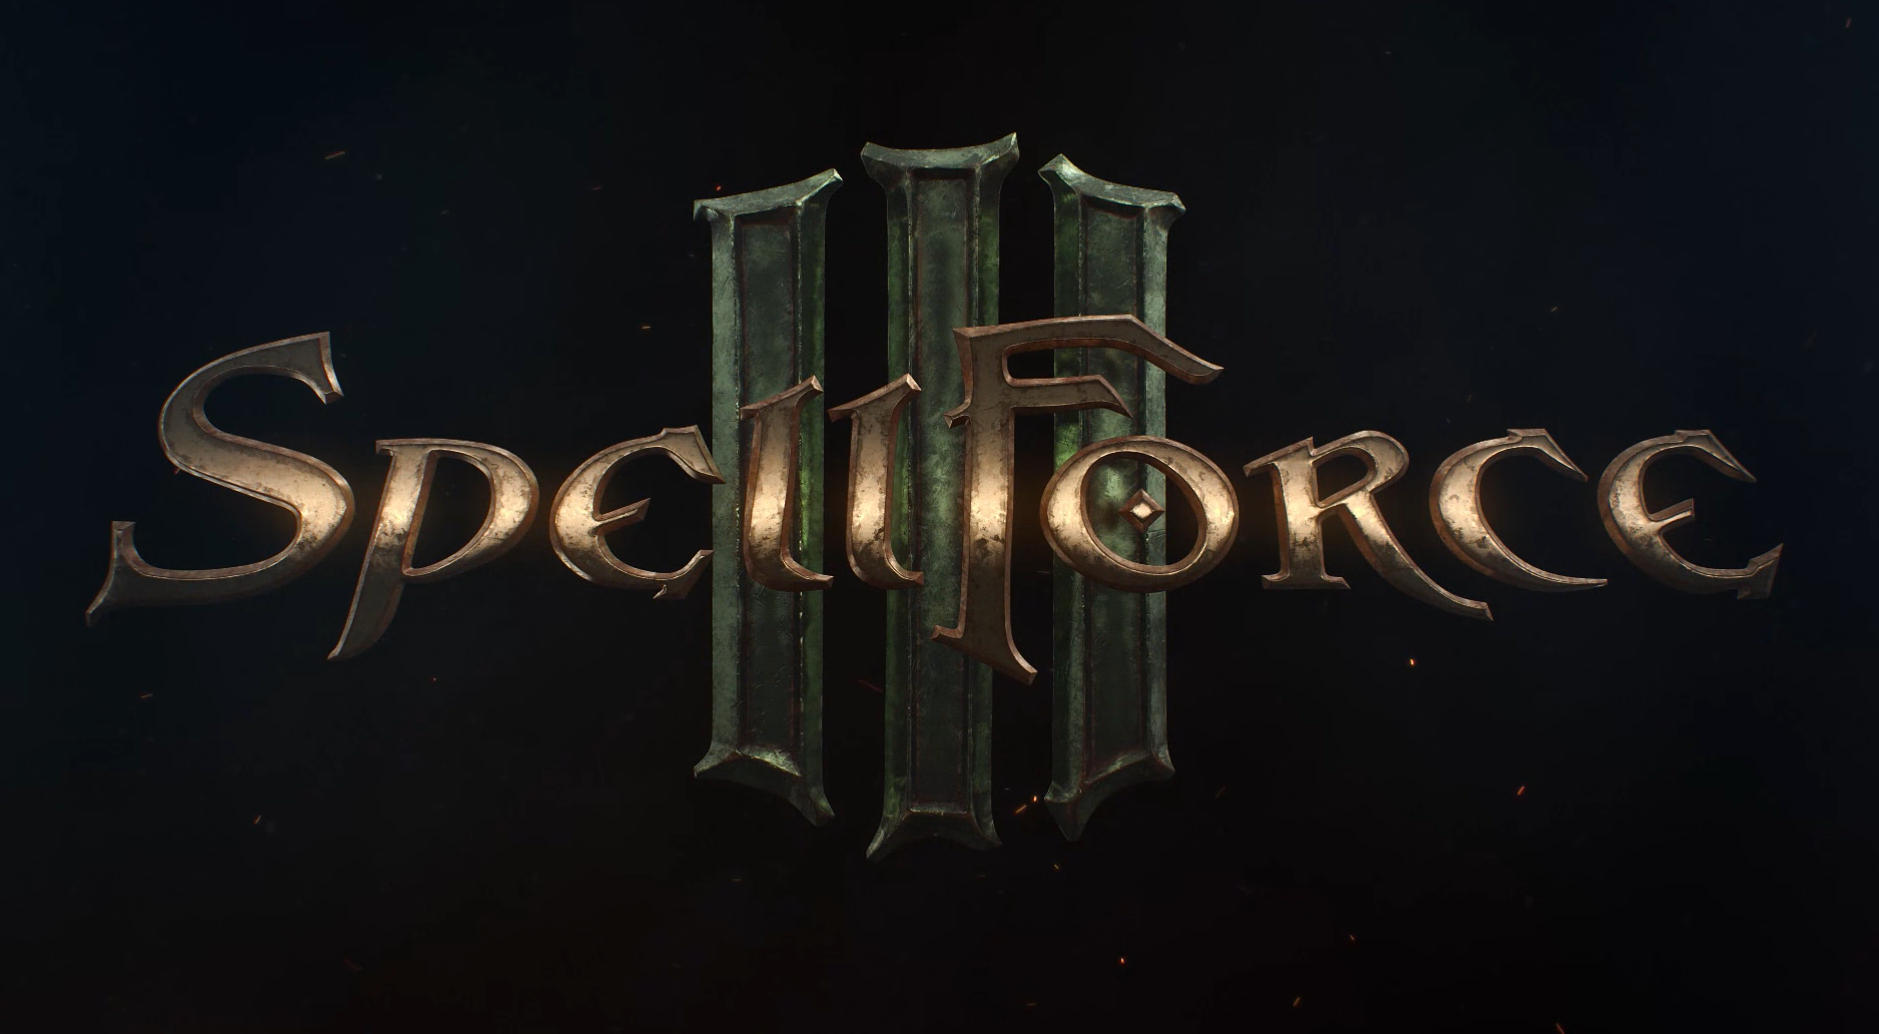 spellforce 3 the refugees